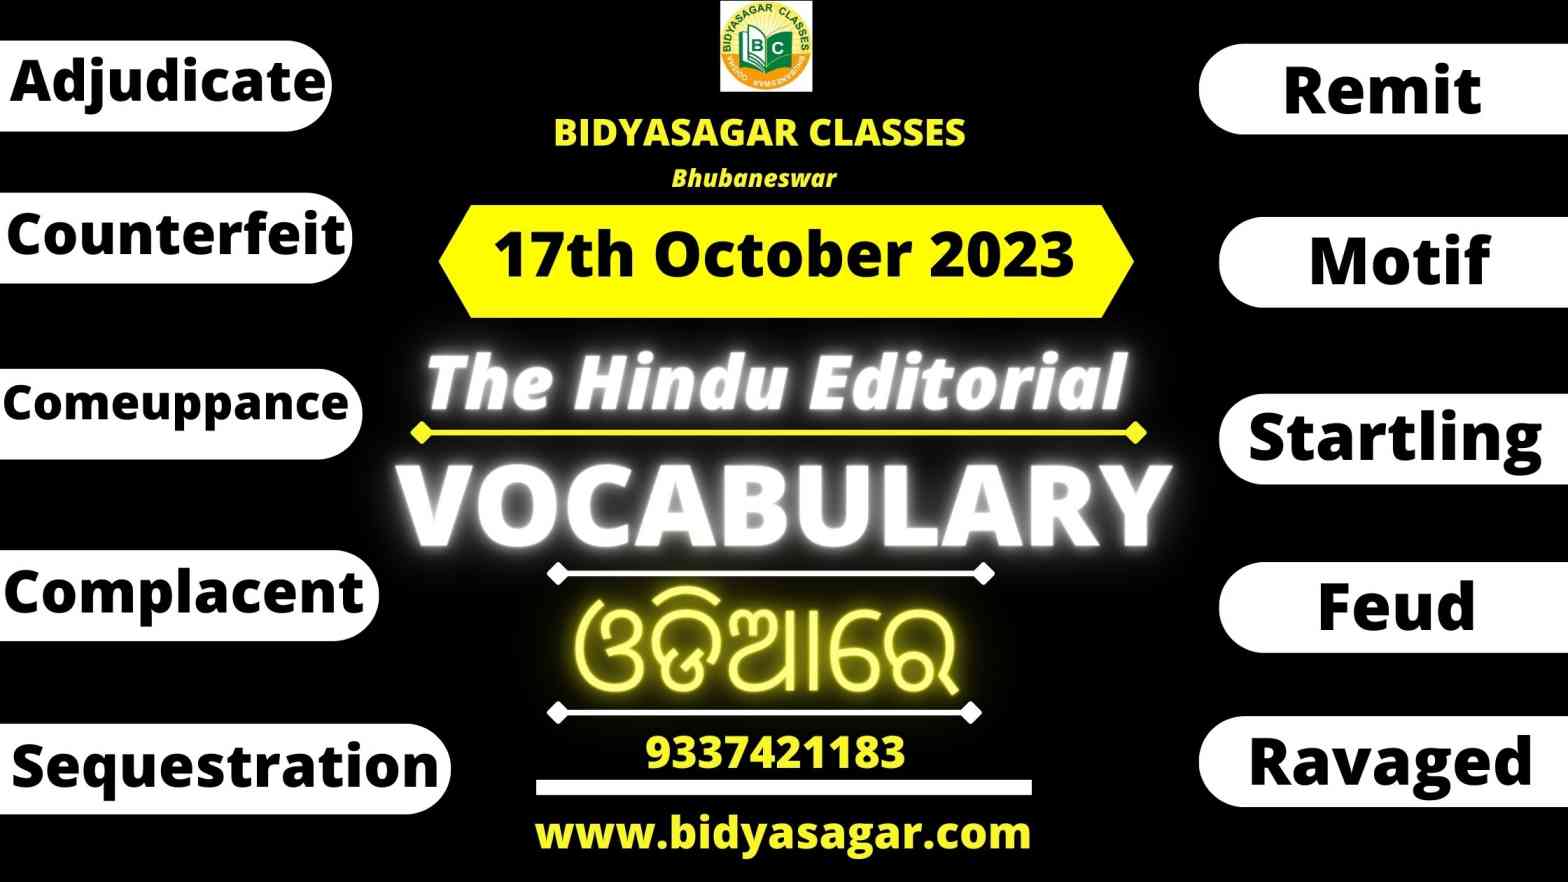 The Hindu Editorial Vocabulary of 17th October 2023